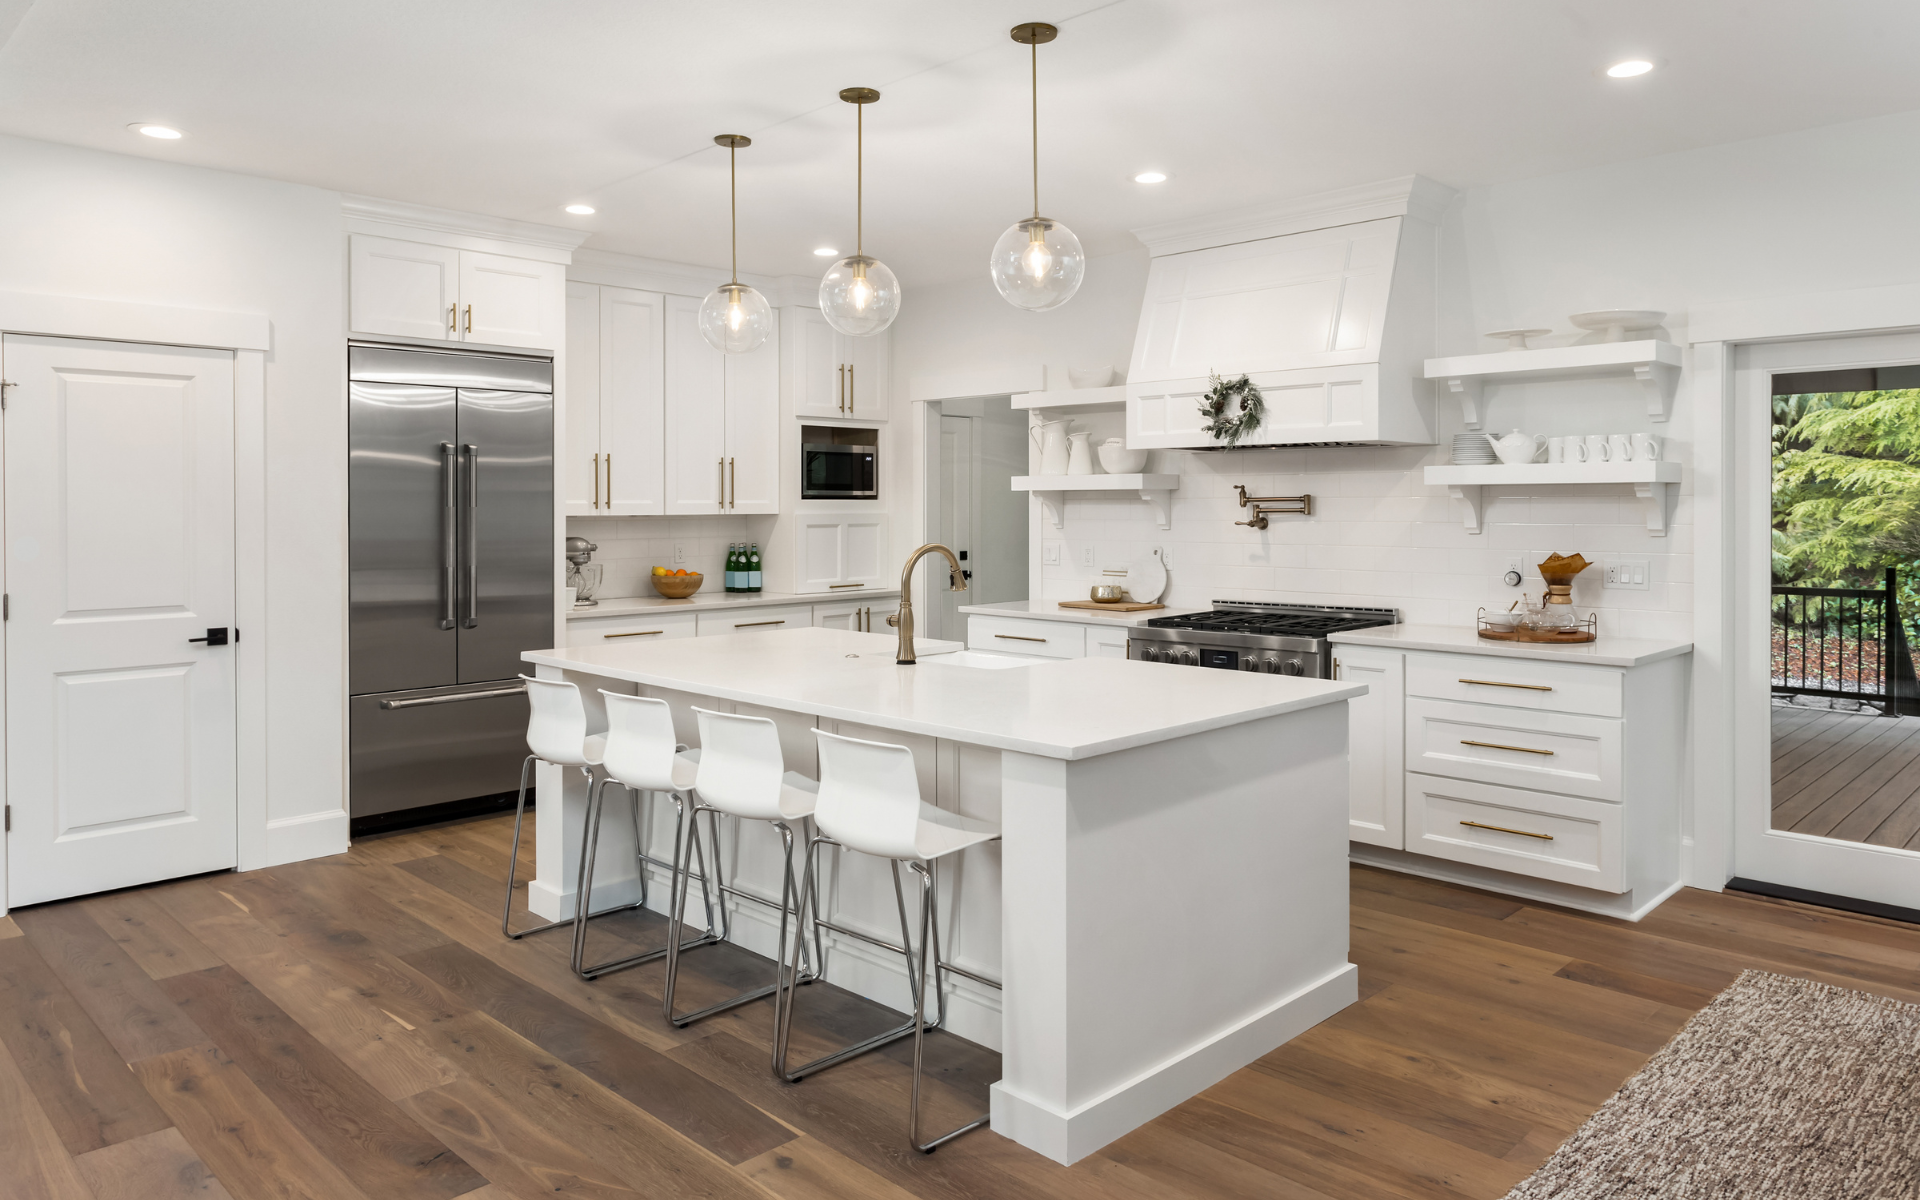 Bright kitchen with white cabinets, countertops, and wood flooring